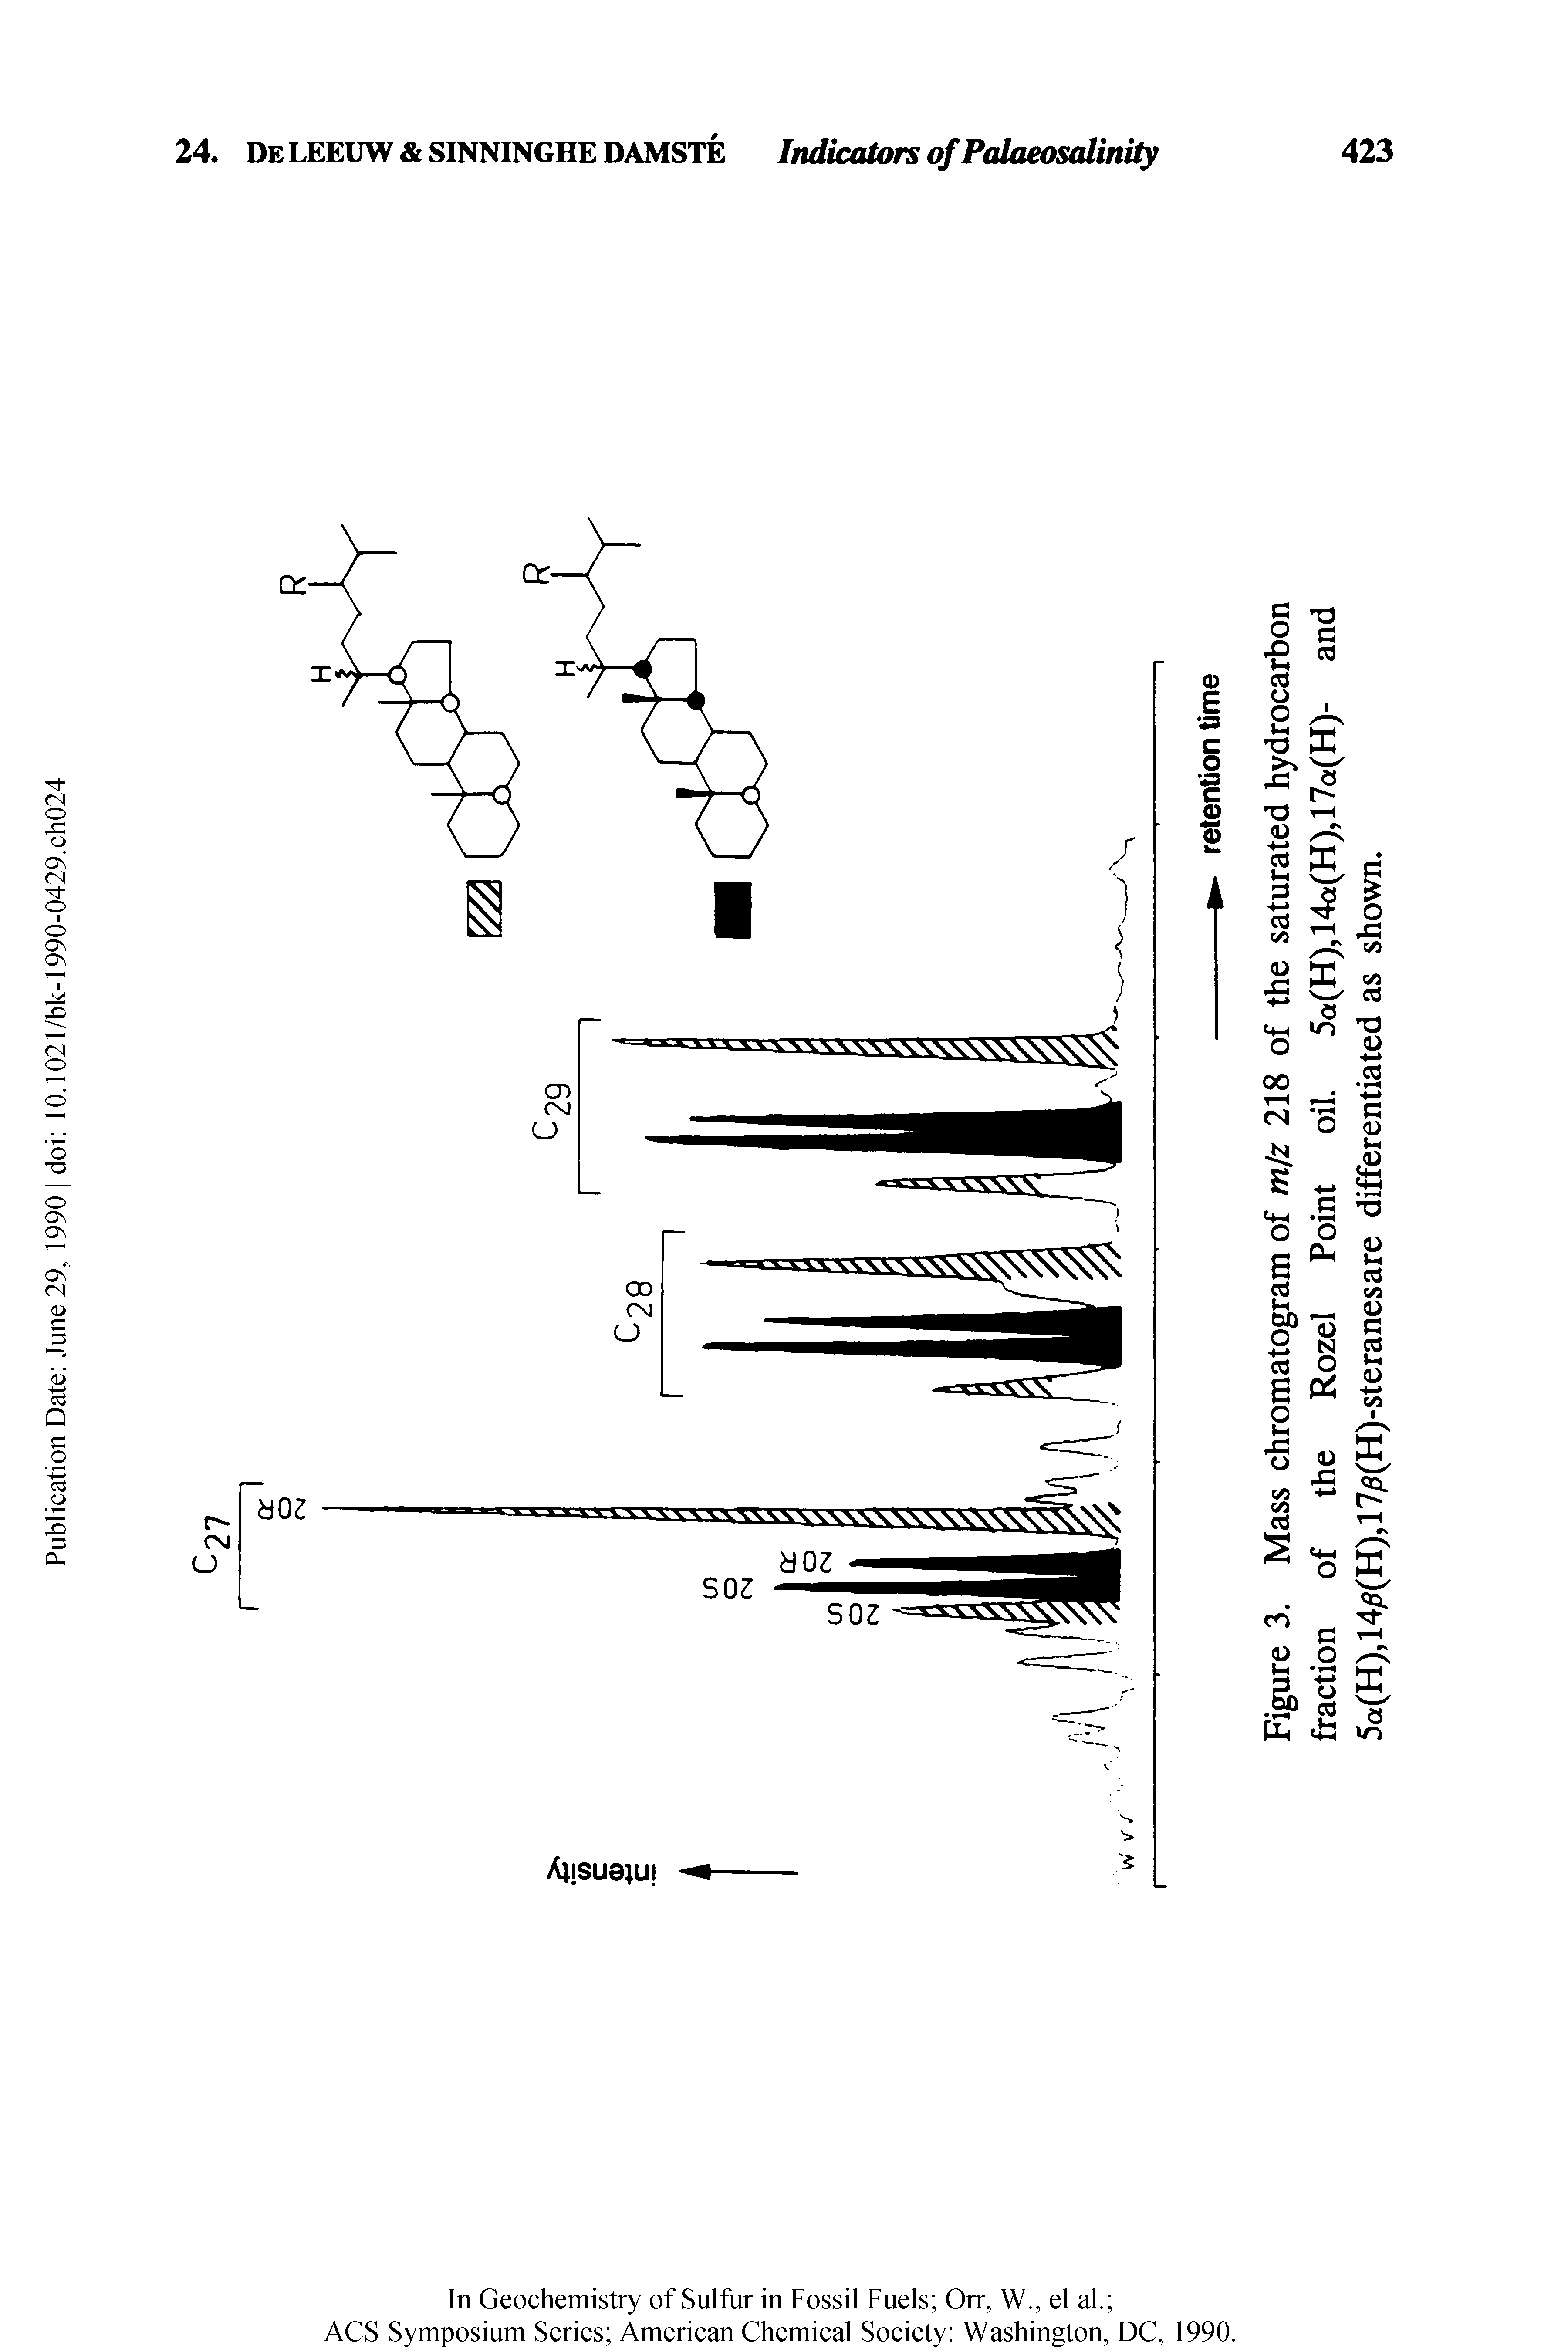 Figure 3. Mass chromatogram of m/z 218 of the saturated hydrocarbon fraction of the Rozel Point oil. 5a(H),14a(H),17a(H)- and 5a(H),140(H),170(H)-steranesare differentiated as shown.